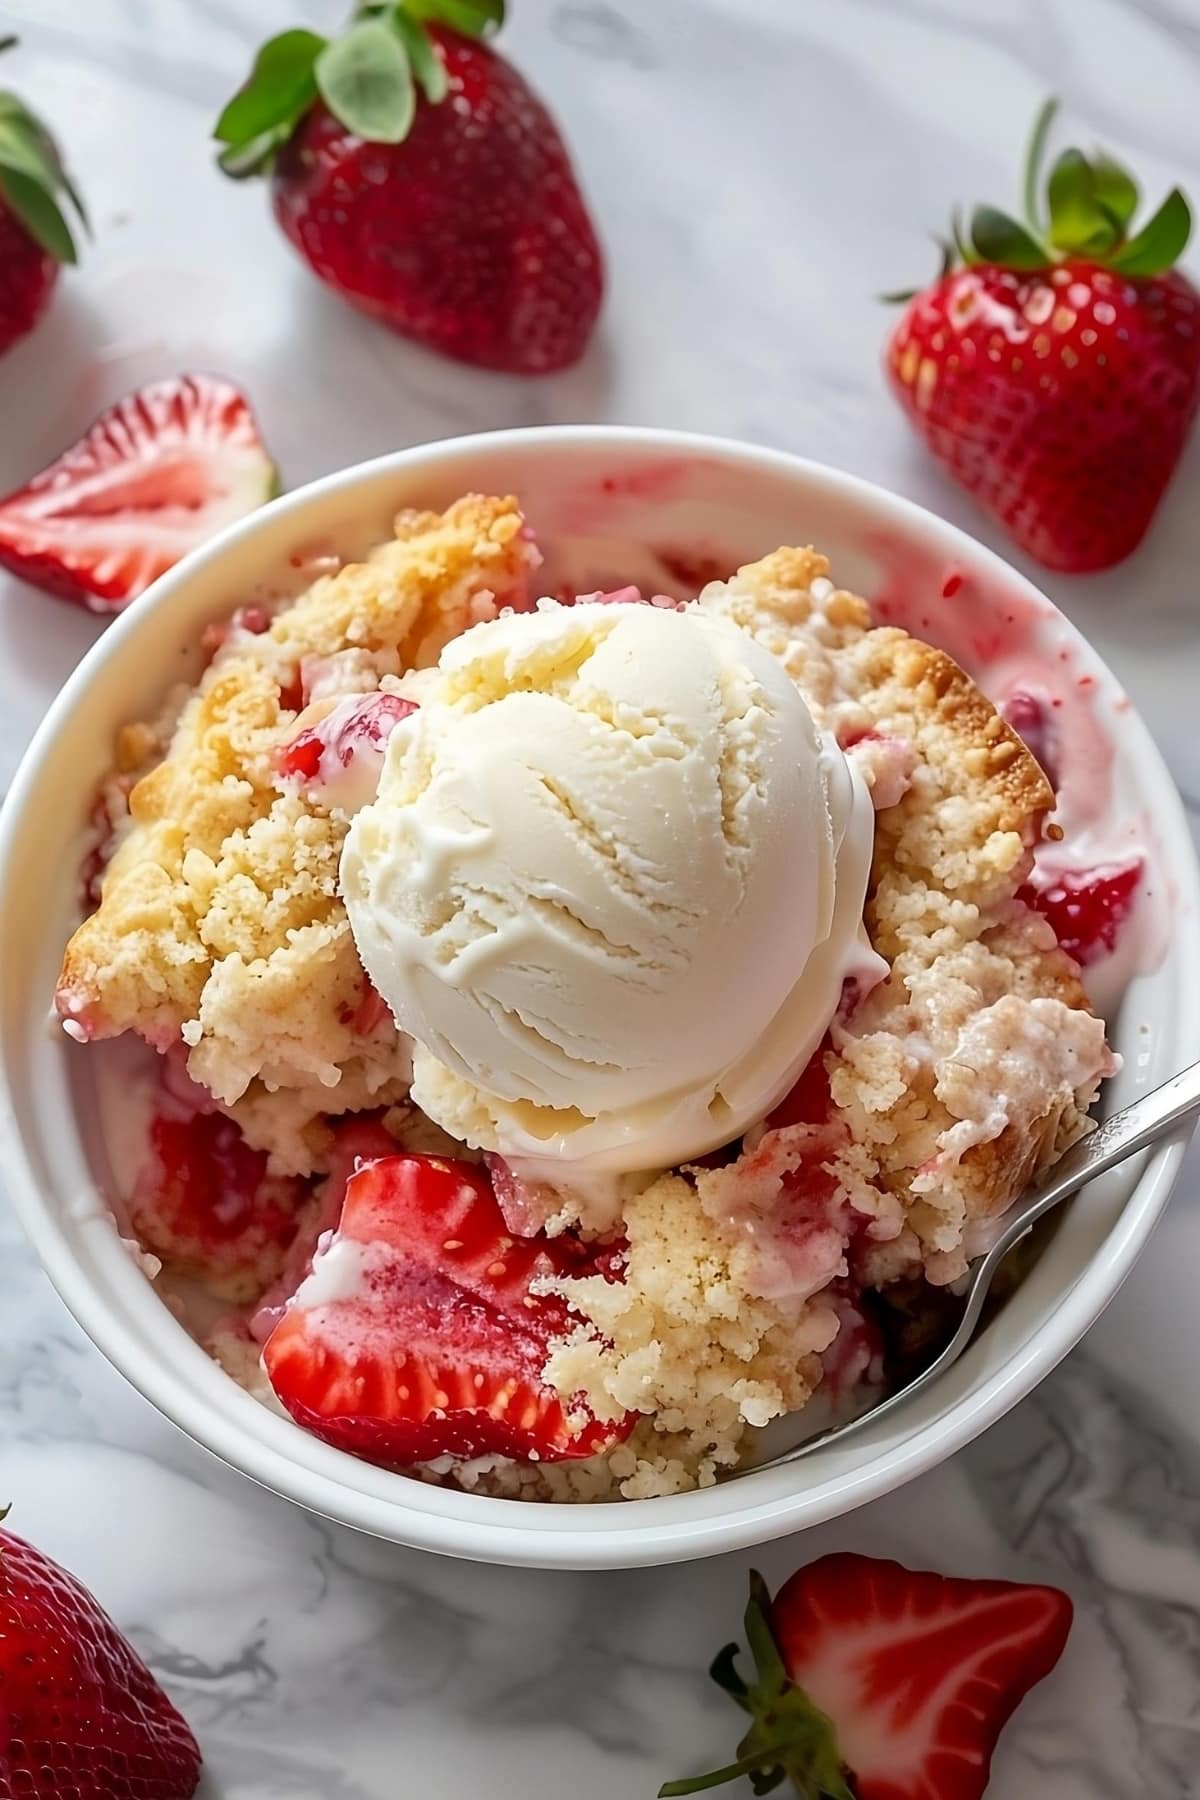 Strawberry dump cake in a white bowl with spoon garnished with vanilla ice cream.